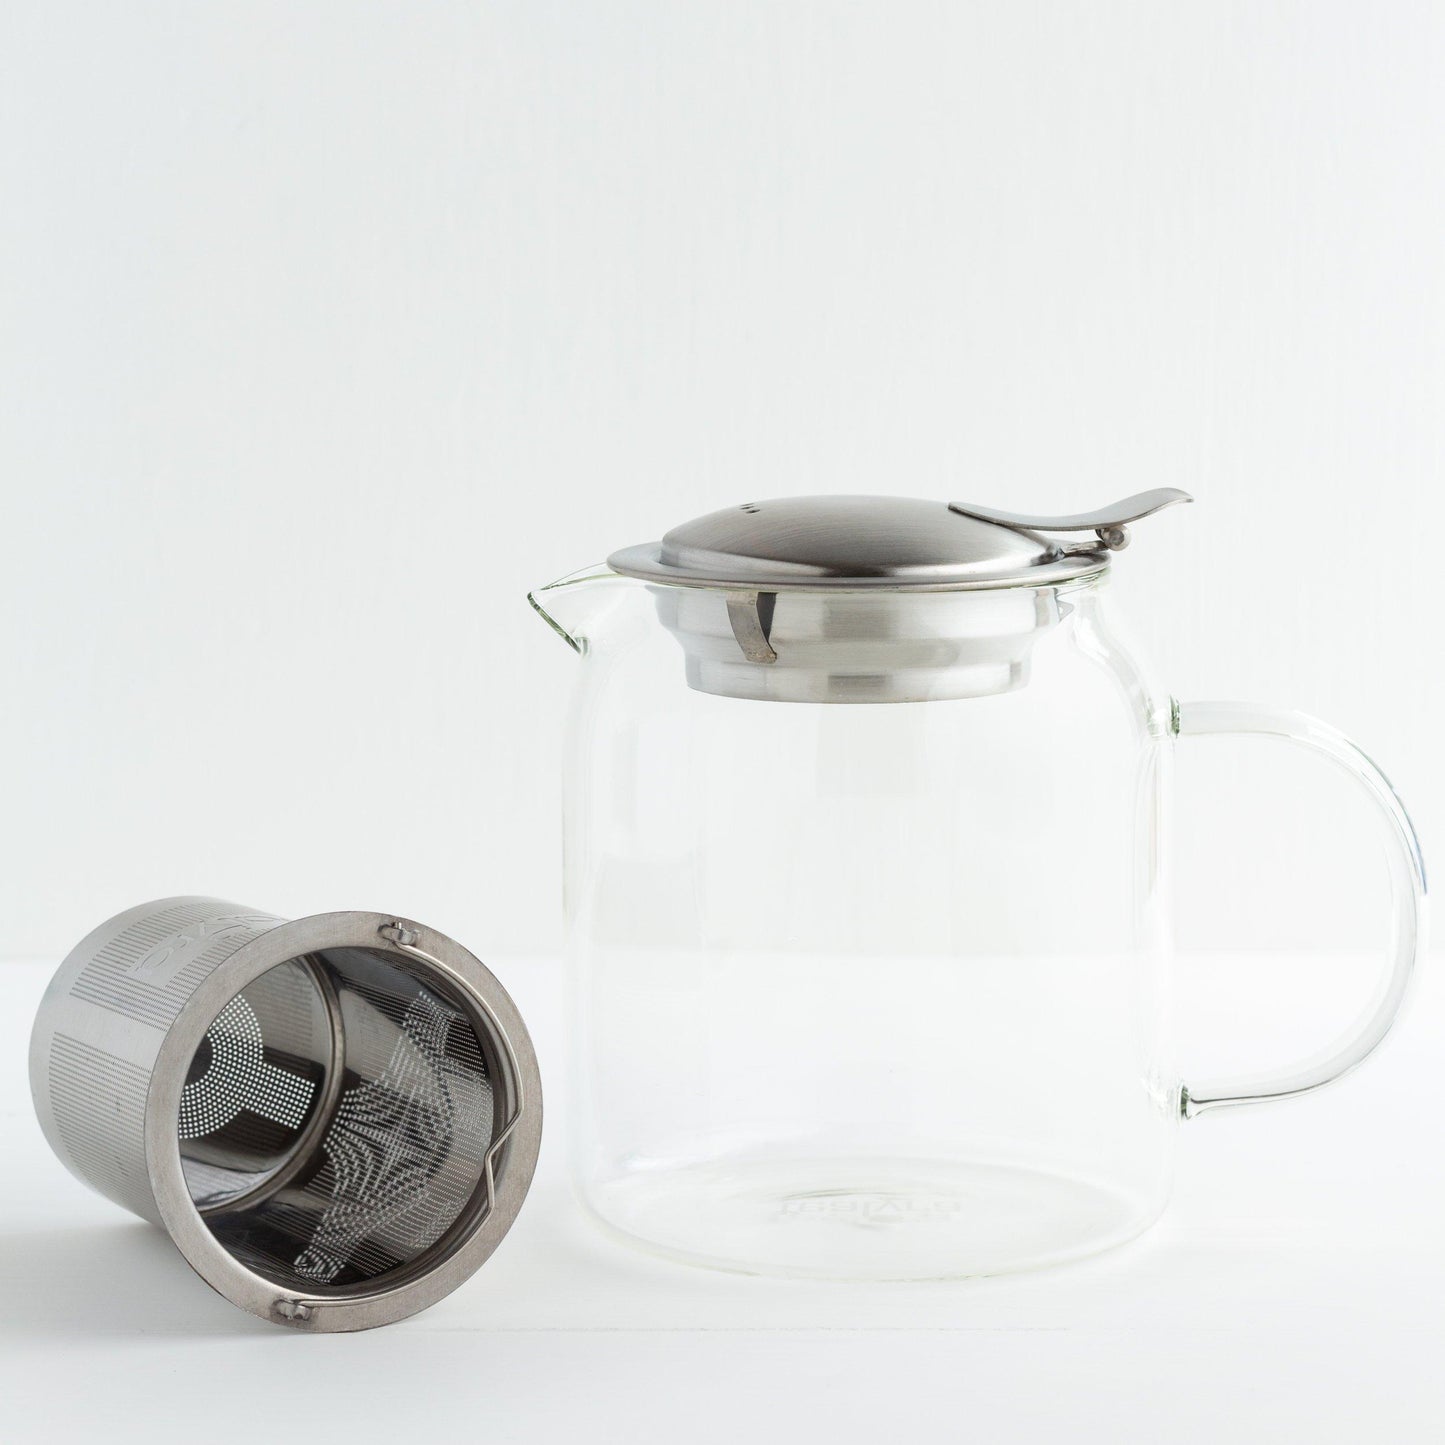 Glass Teapot with Stainless Steel Infuser shown with the infuser lying on its side outside of the teapot